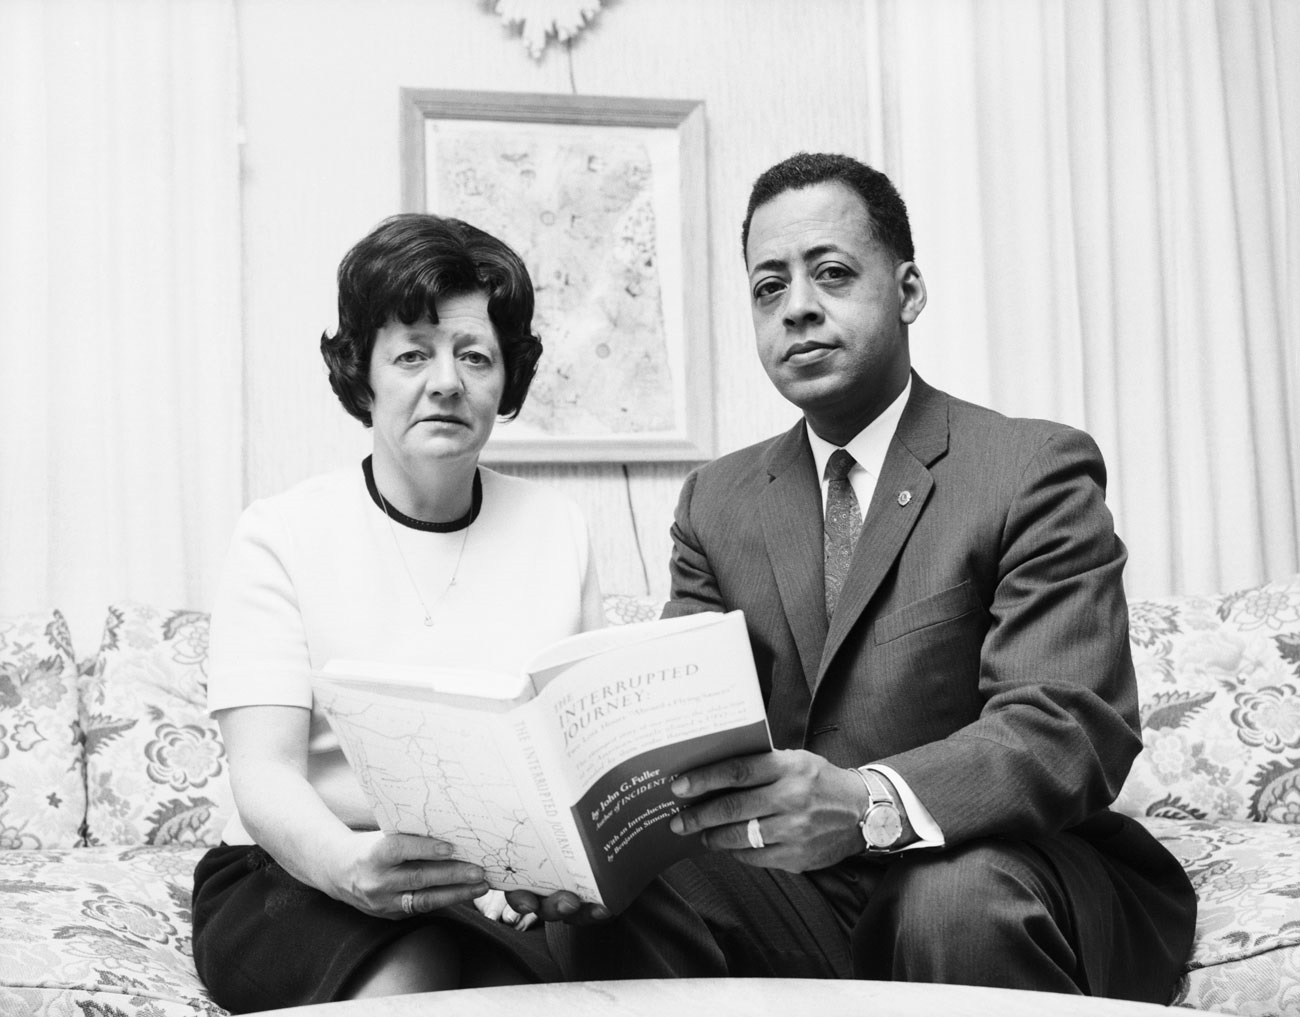 The Betty and Barney Hill